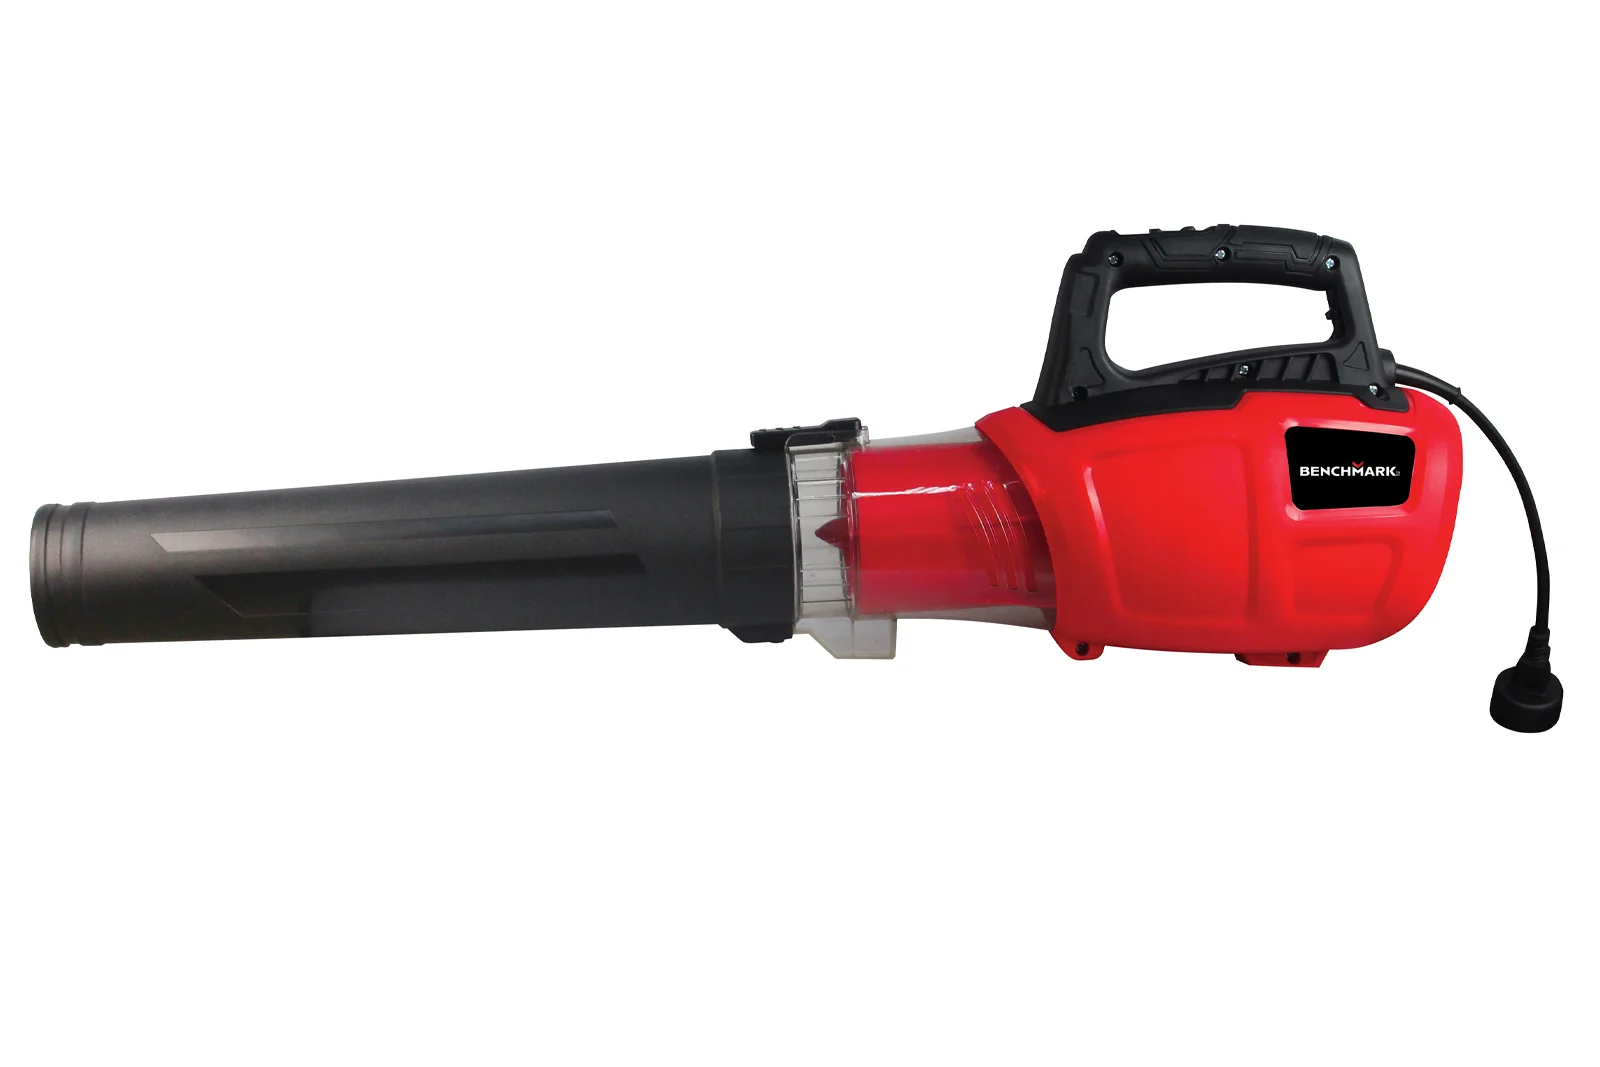 A corded electric leaf blower